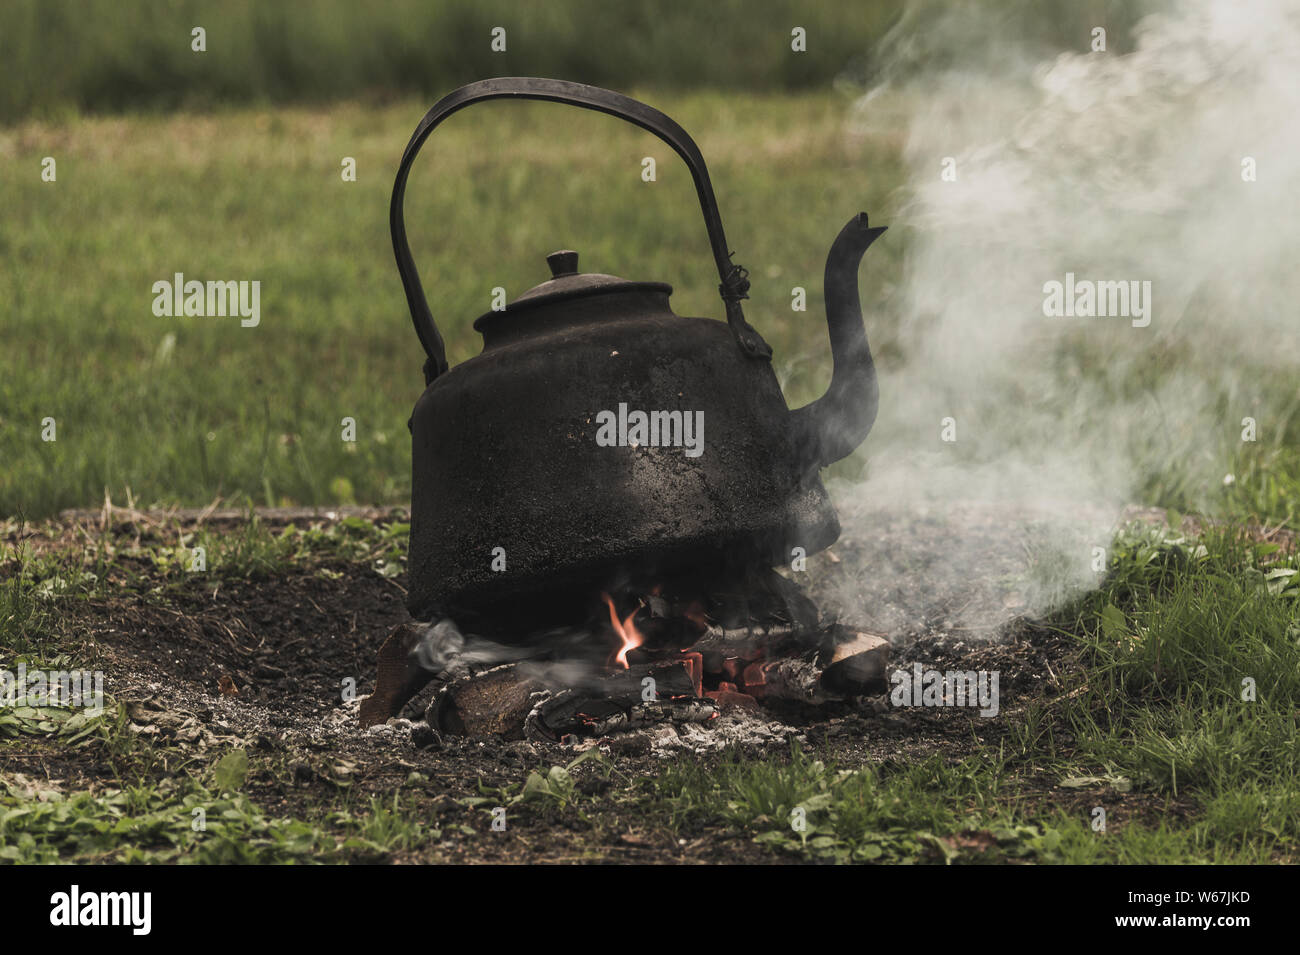 Black kettle on fire during daytime photo – Free York Image on